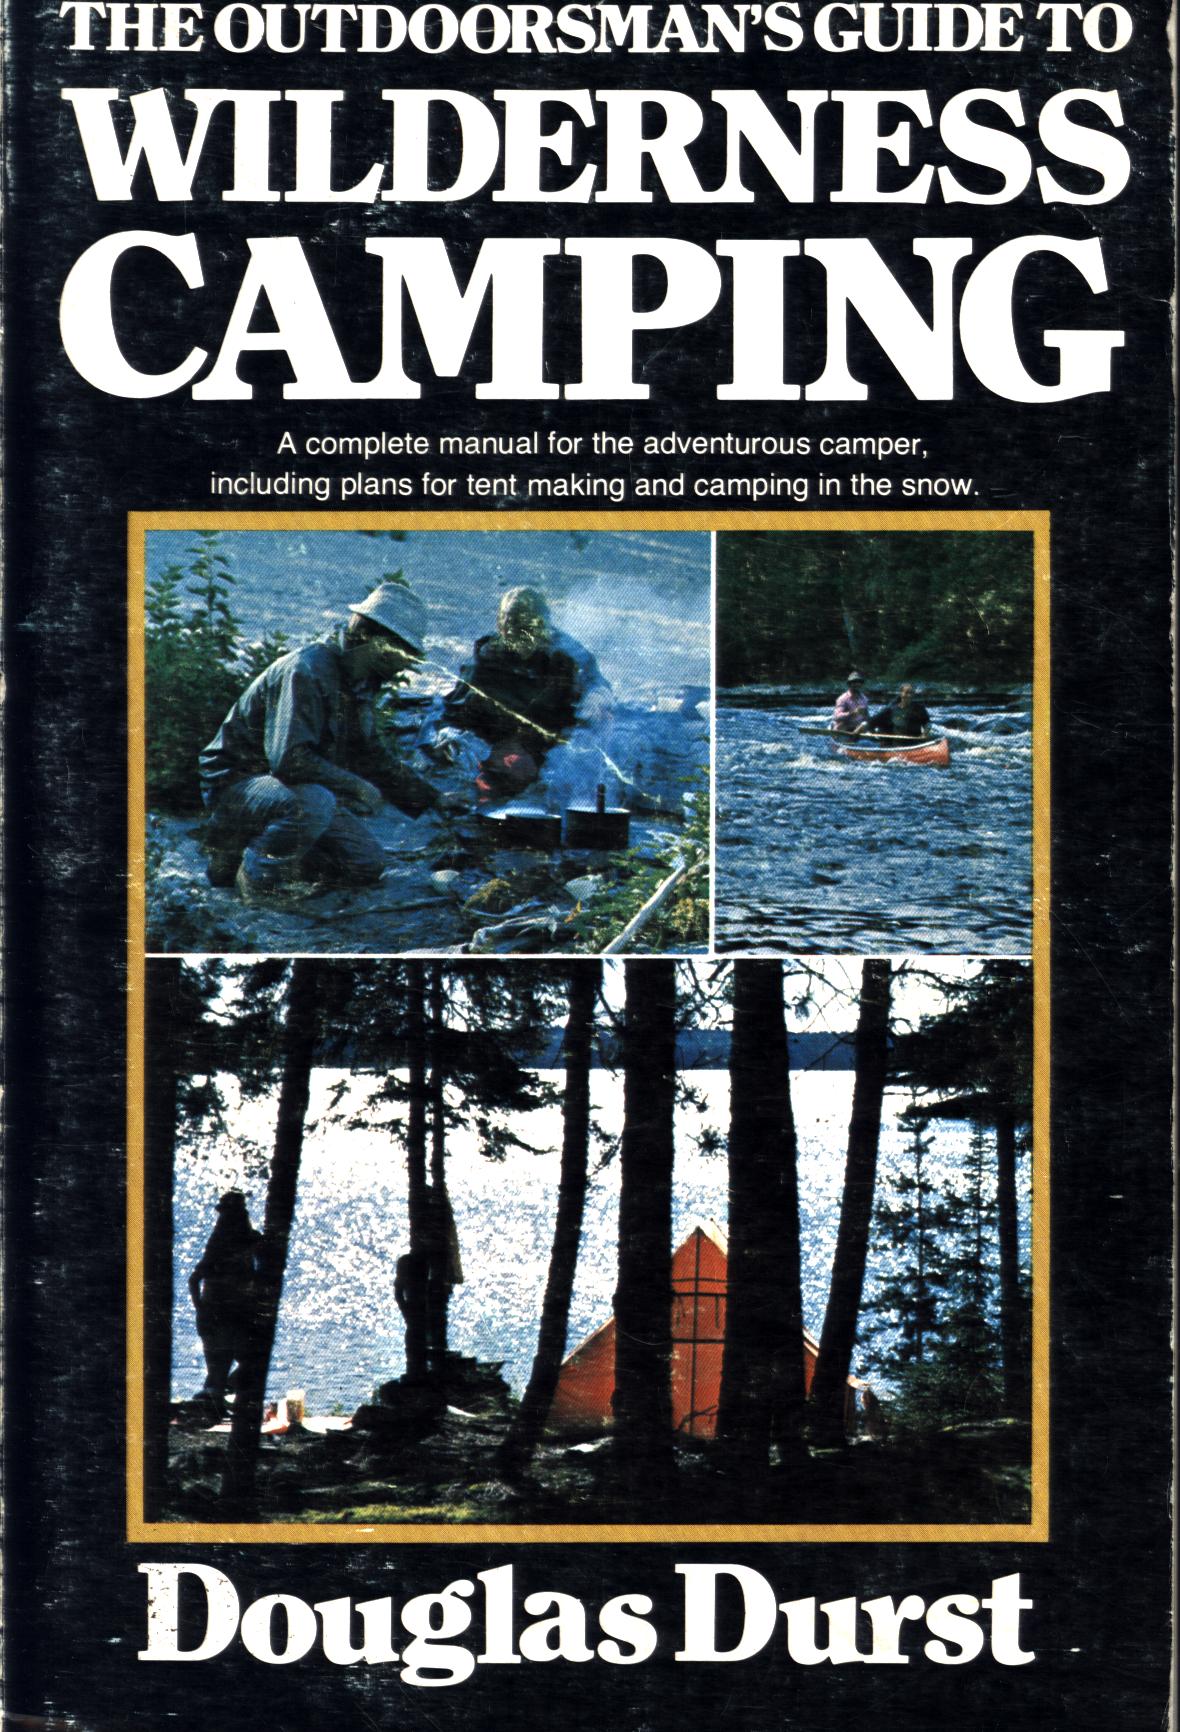 THE OUTDOORSMAN'S GUIDE TO WILDERNESS CAMPING. 